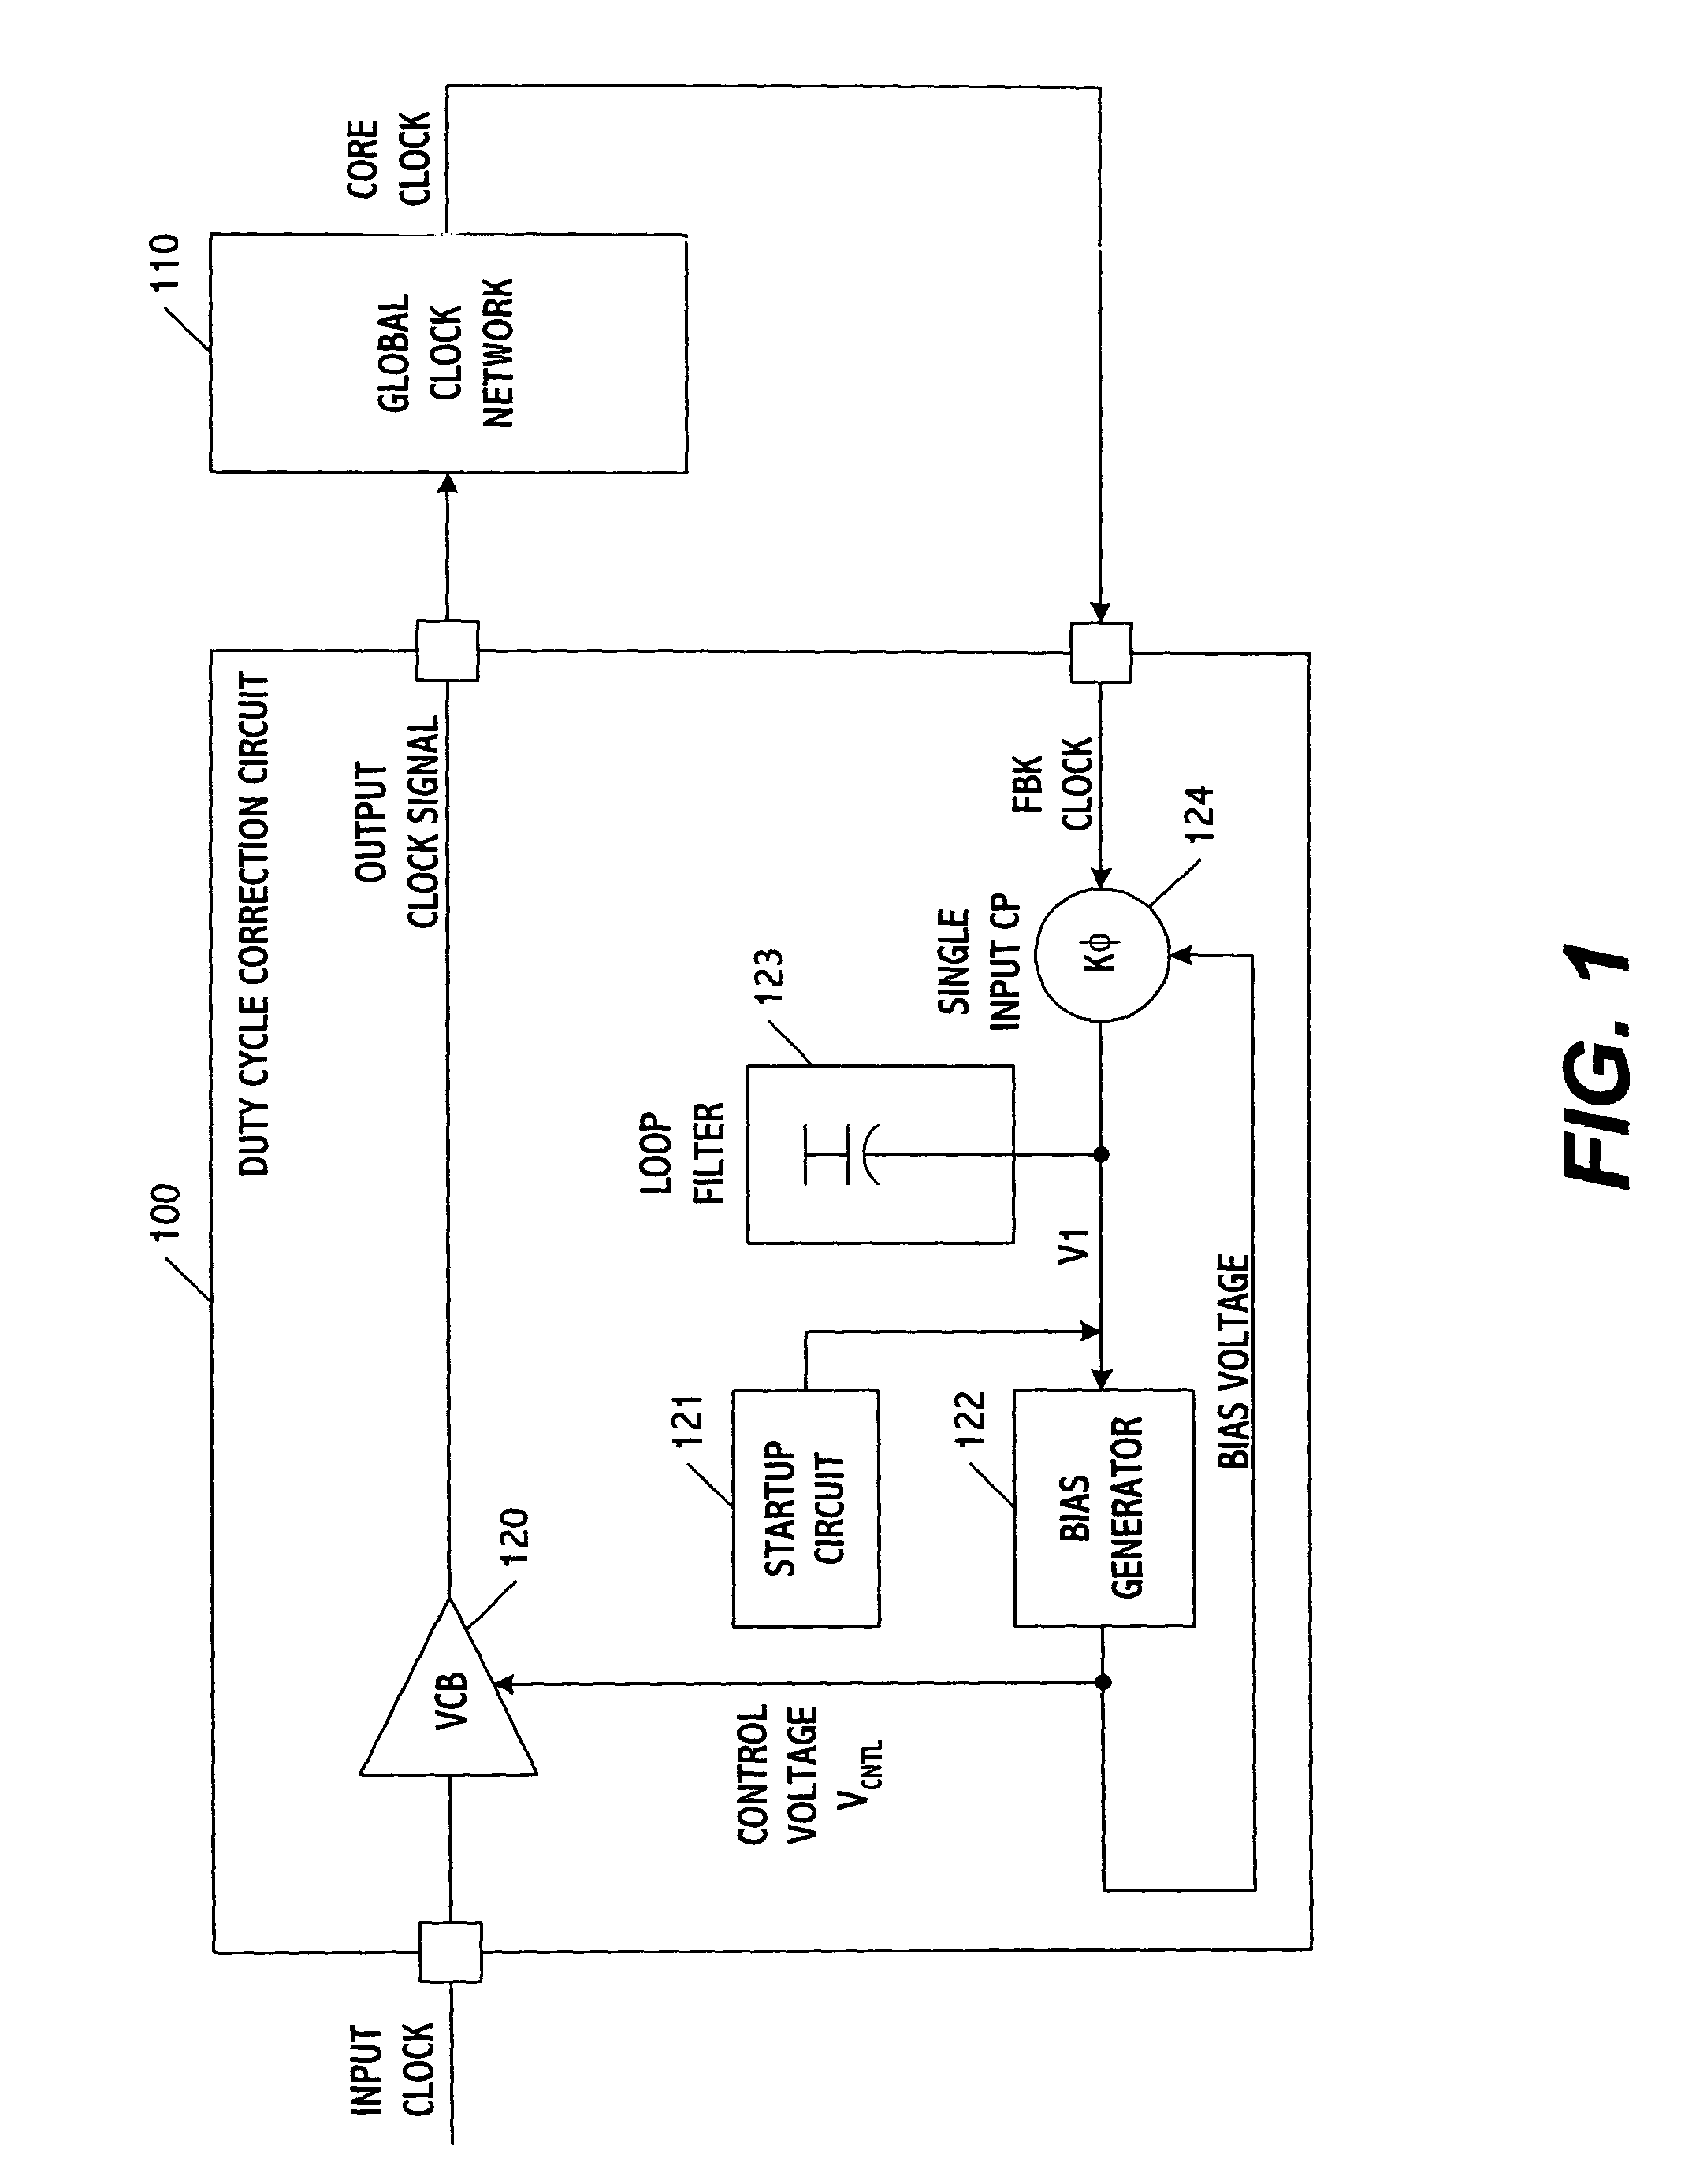 High-accuracy continuous duty-cycle correction circuit